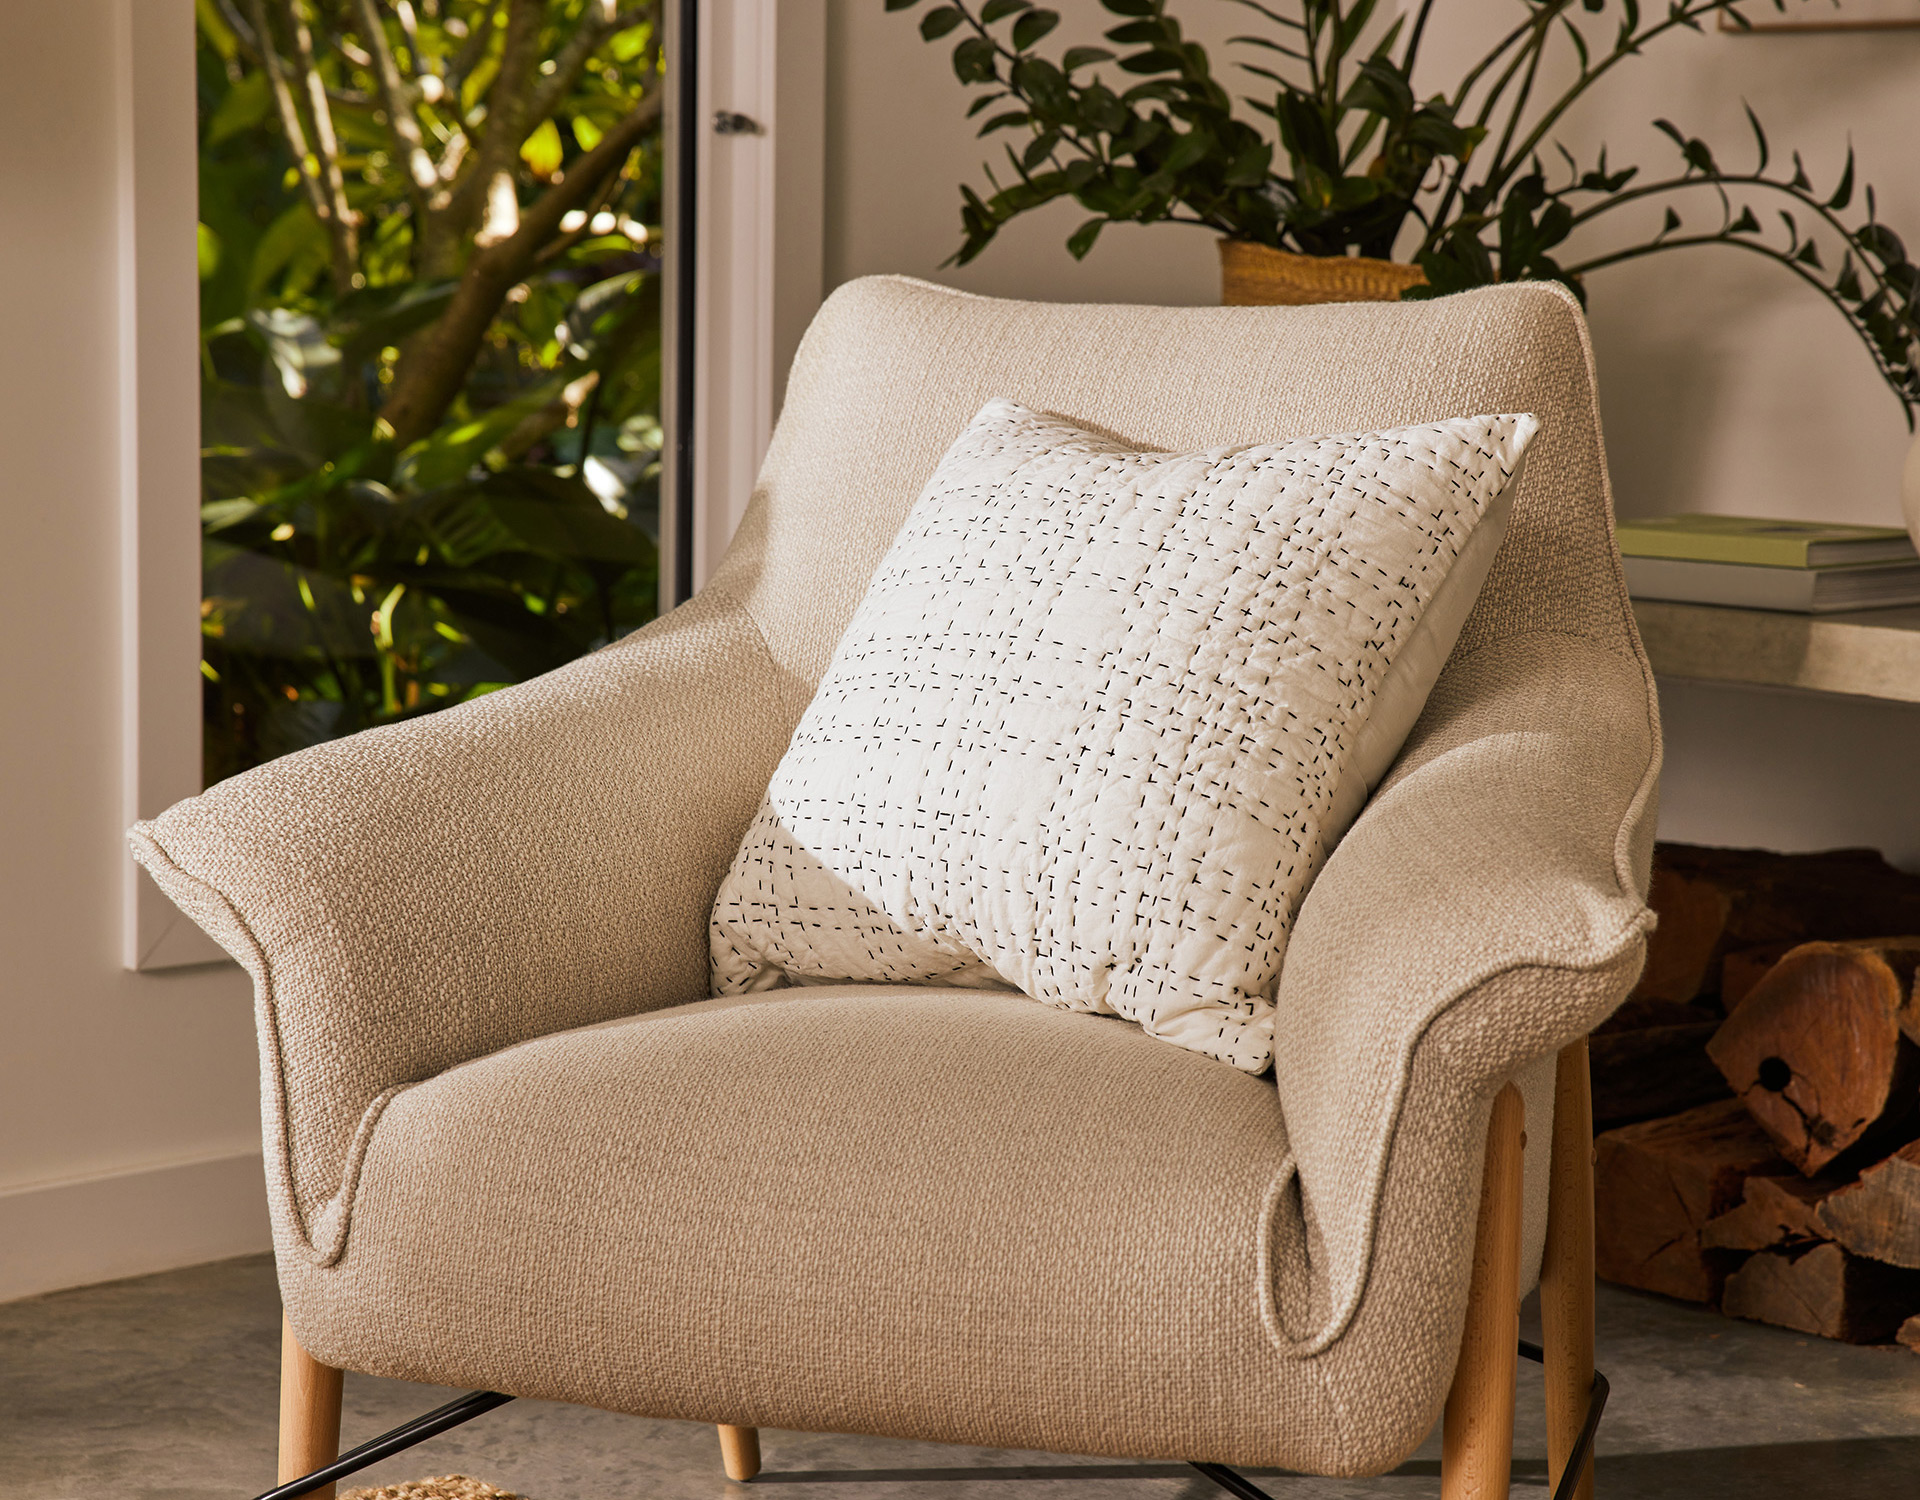 A warm Scandinavian living room is created thanks to clean lines, timber features and quality pieces such as this Koala chair and cushion